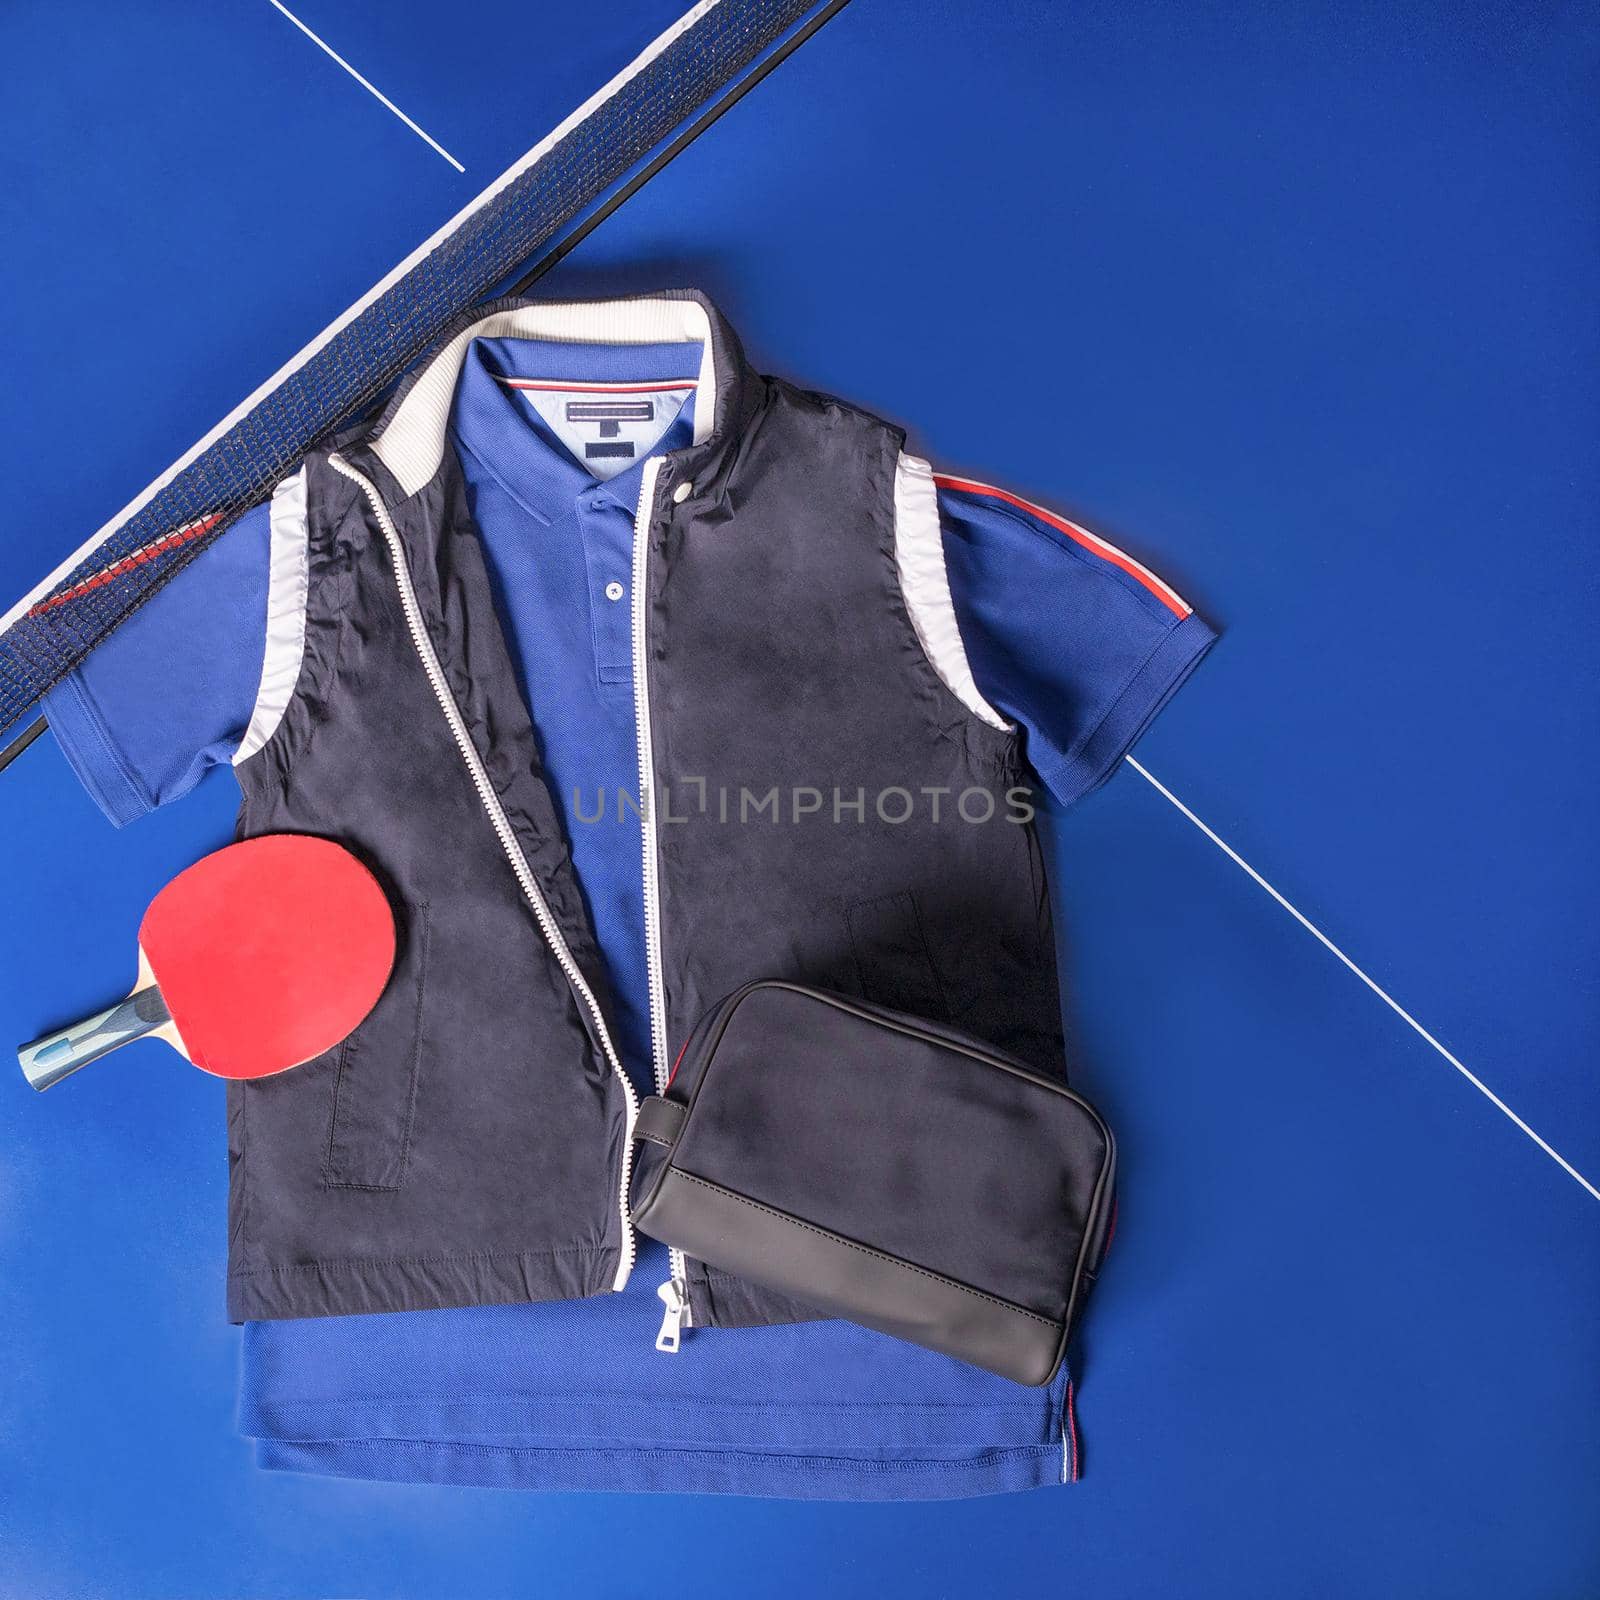 Blue tennis wear, shirt and jacket top view by ferhad